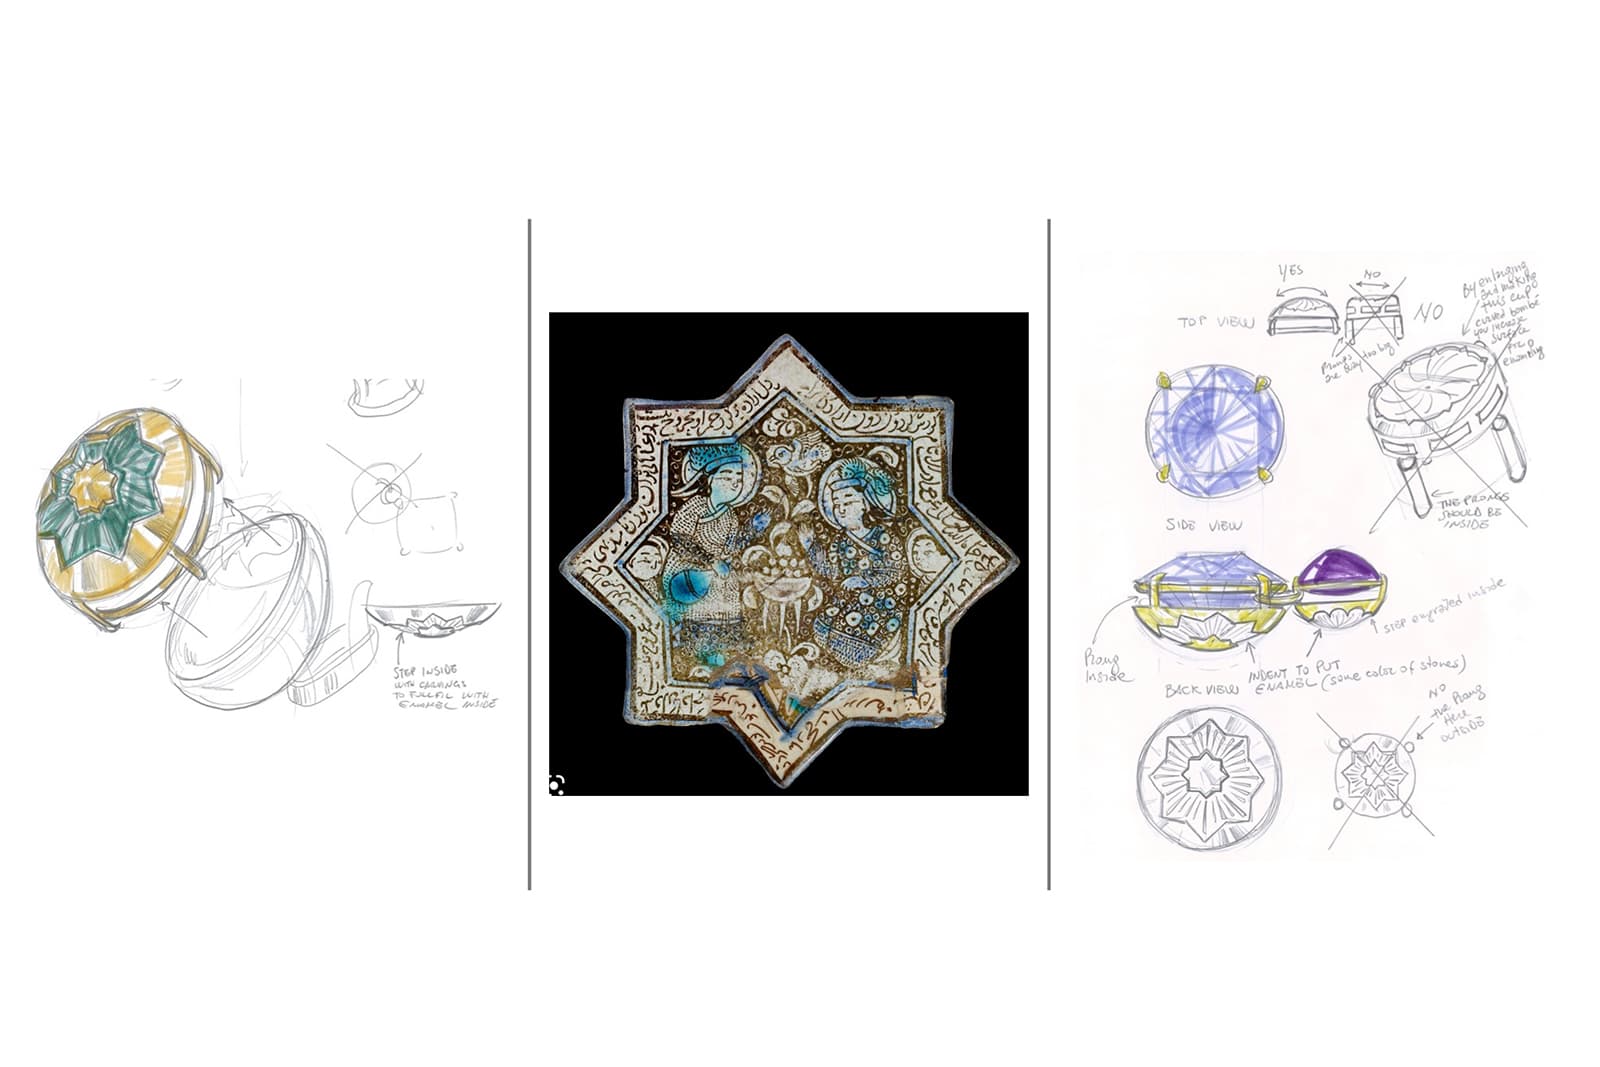 The design concepts and ideas behind the Alessio Boschi Harem's Garden High Jewellery suite